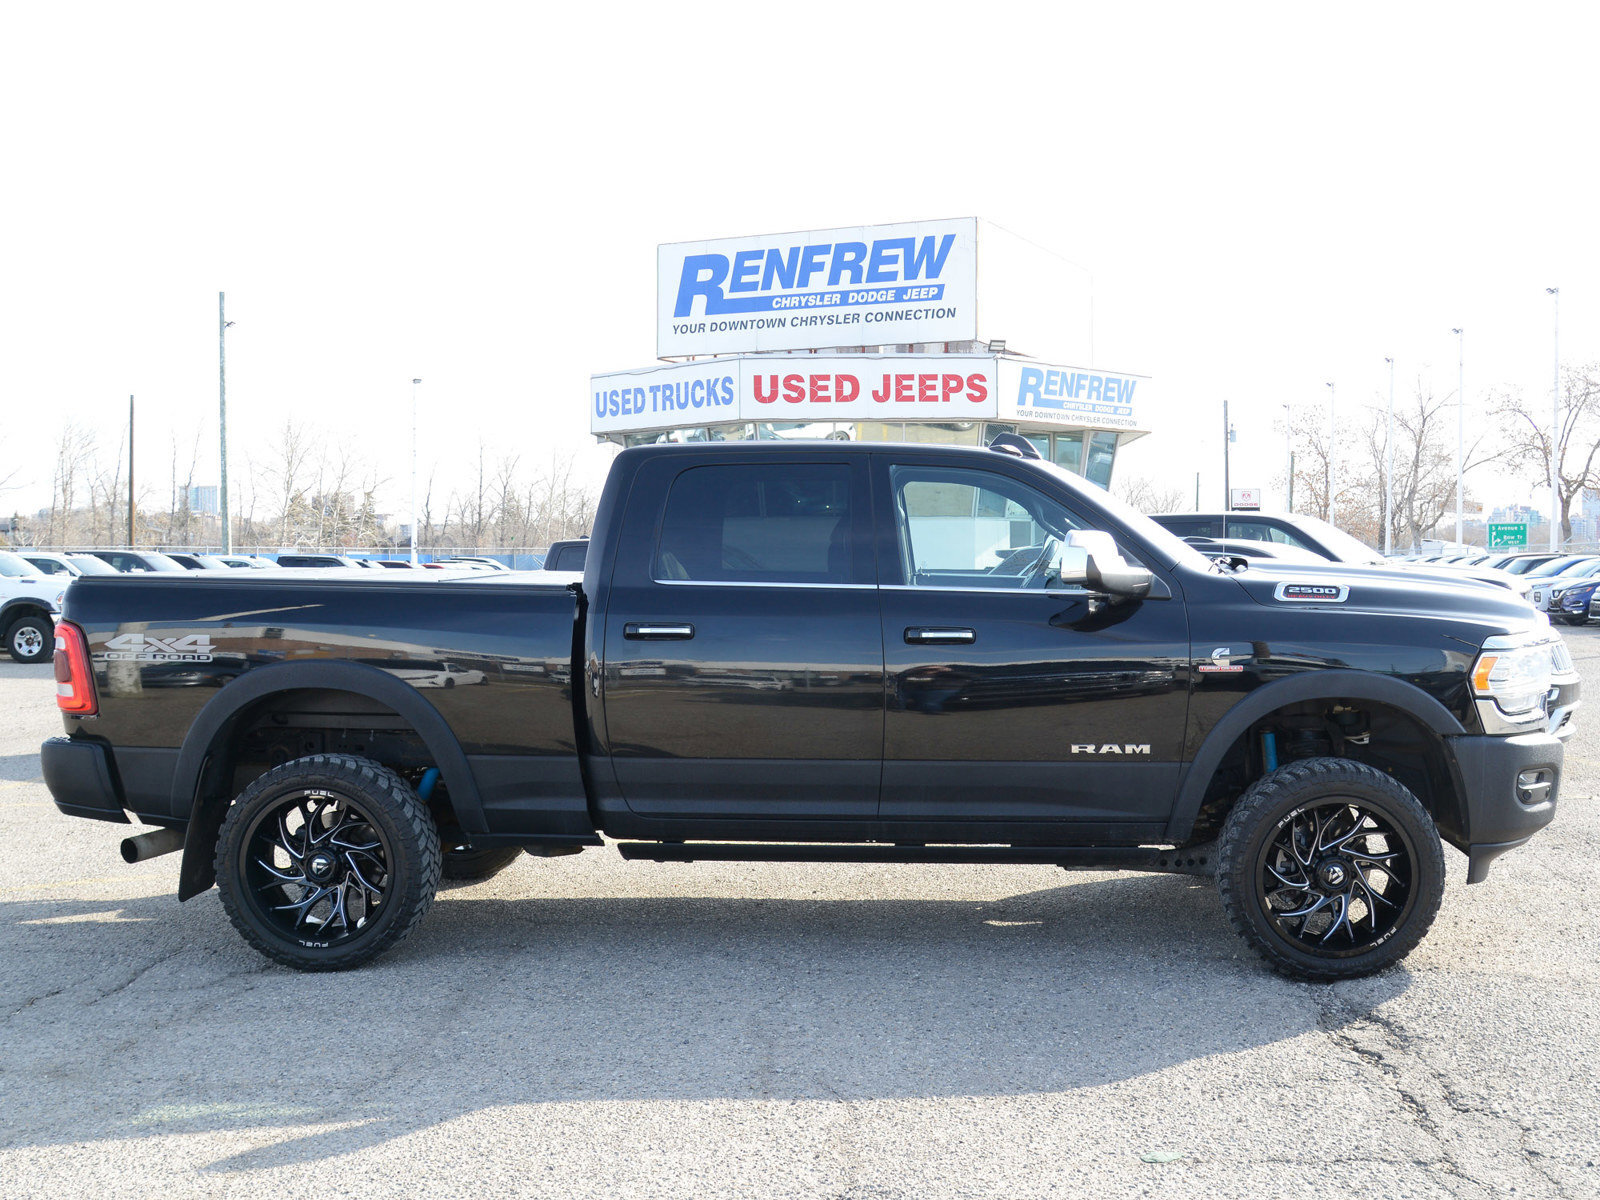 2019 Ram 2500 Limited Crew Cab 4x4, Sunroof, Towing Tech, Level 